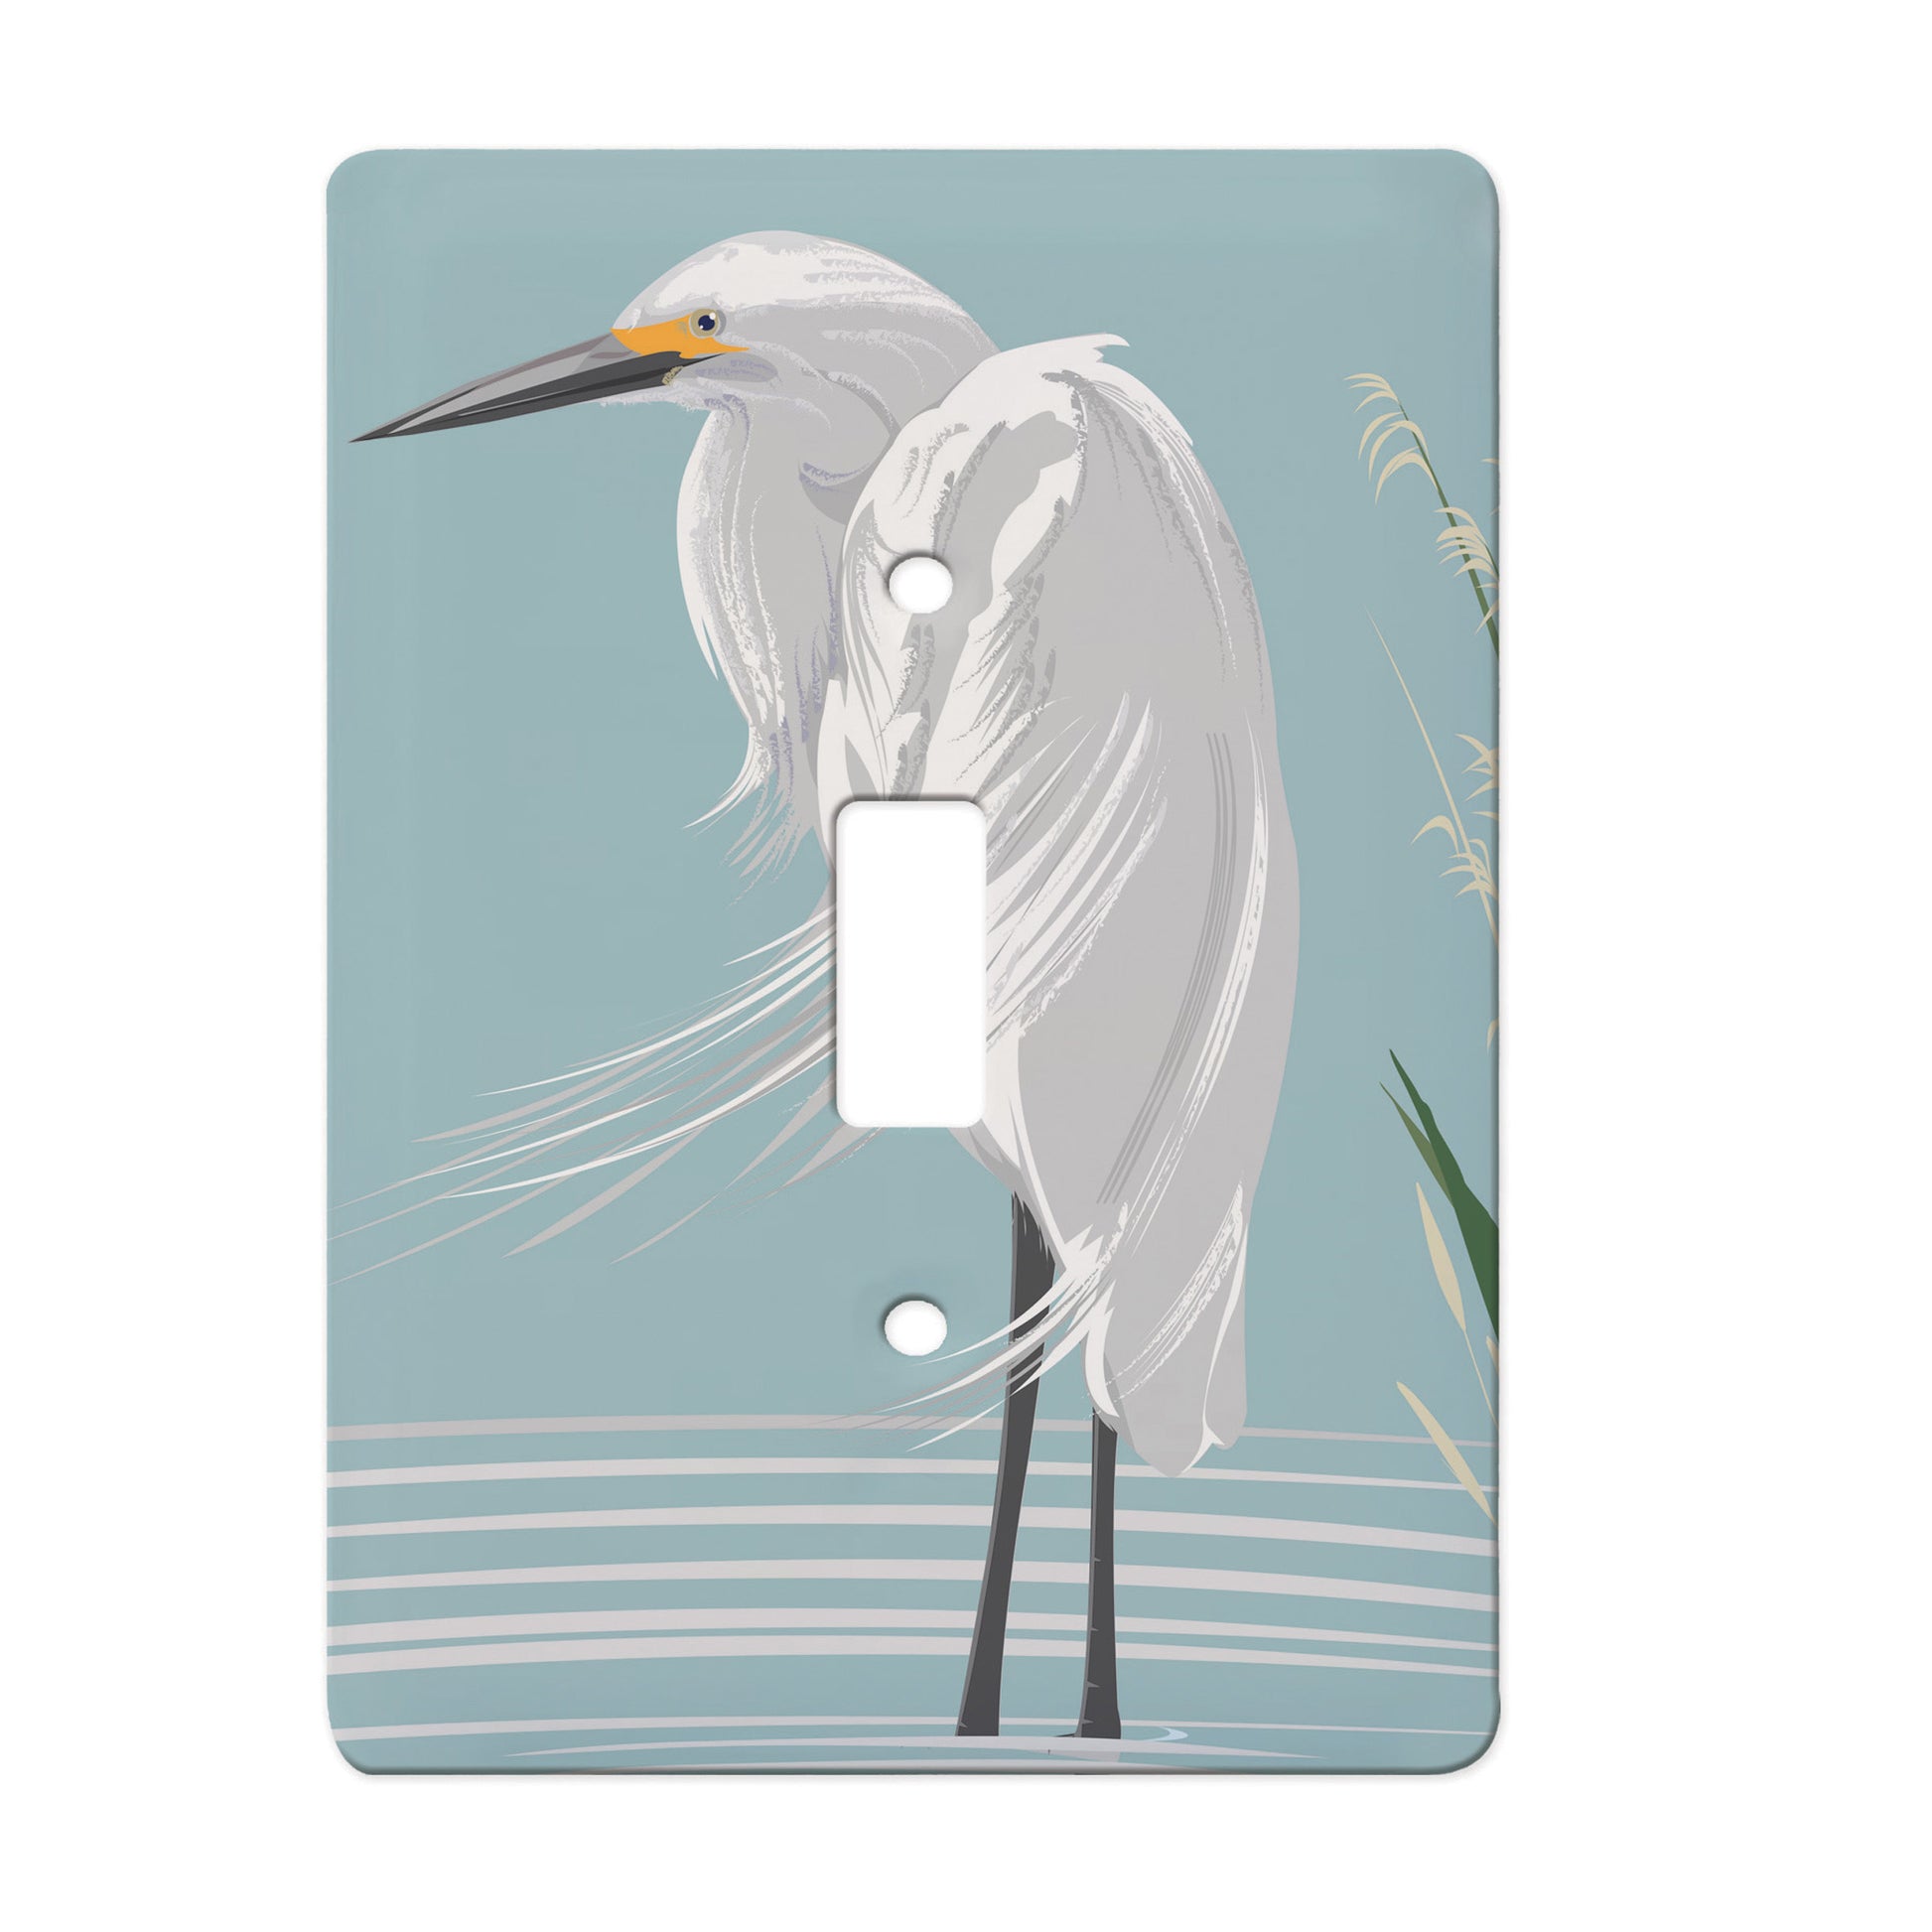 white ceramic single toggle switch plate featuring a white egret.